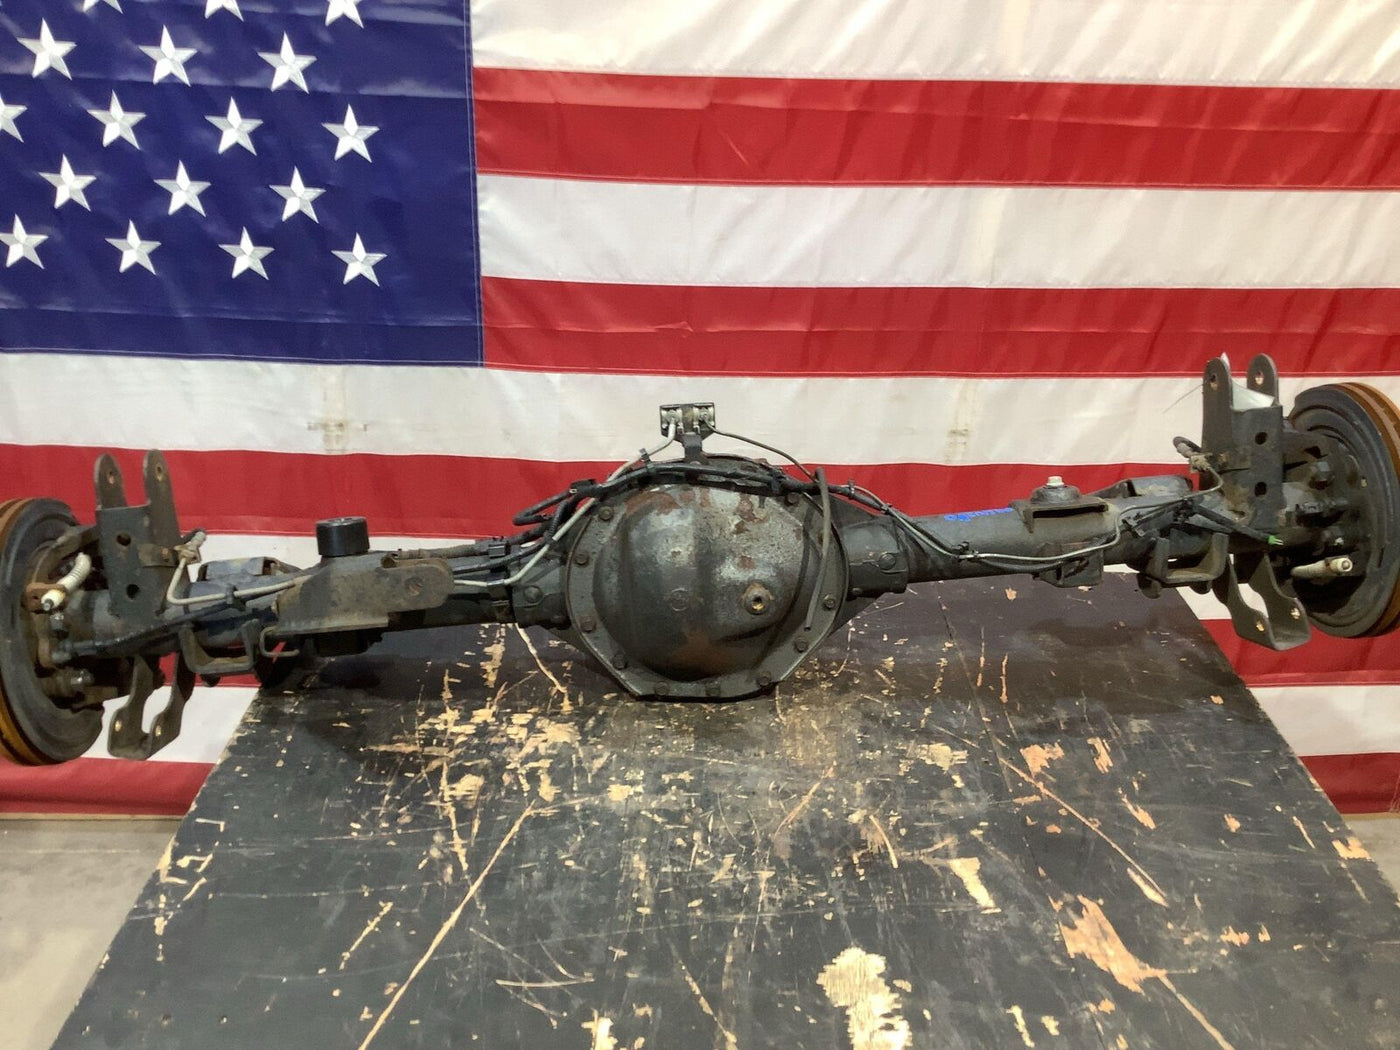 08-09 Hummer H2 Rear Axle Dropout (3.73 Gear Ratio) OPT GT4 (200K Miles)